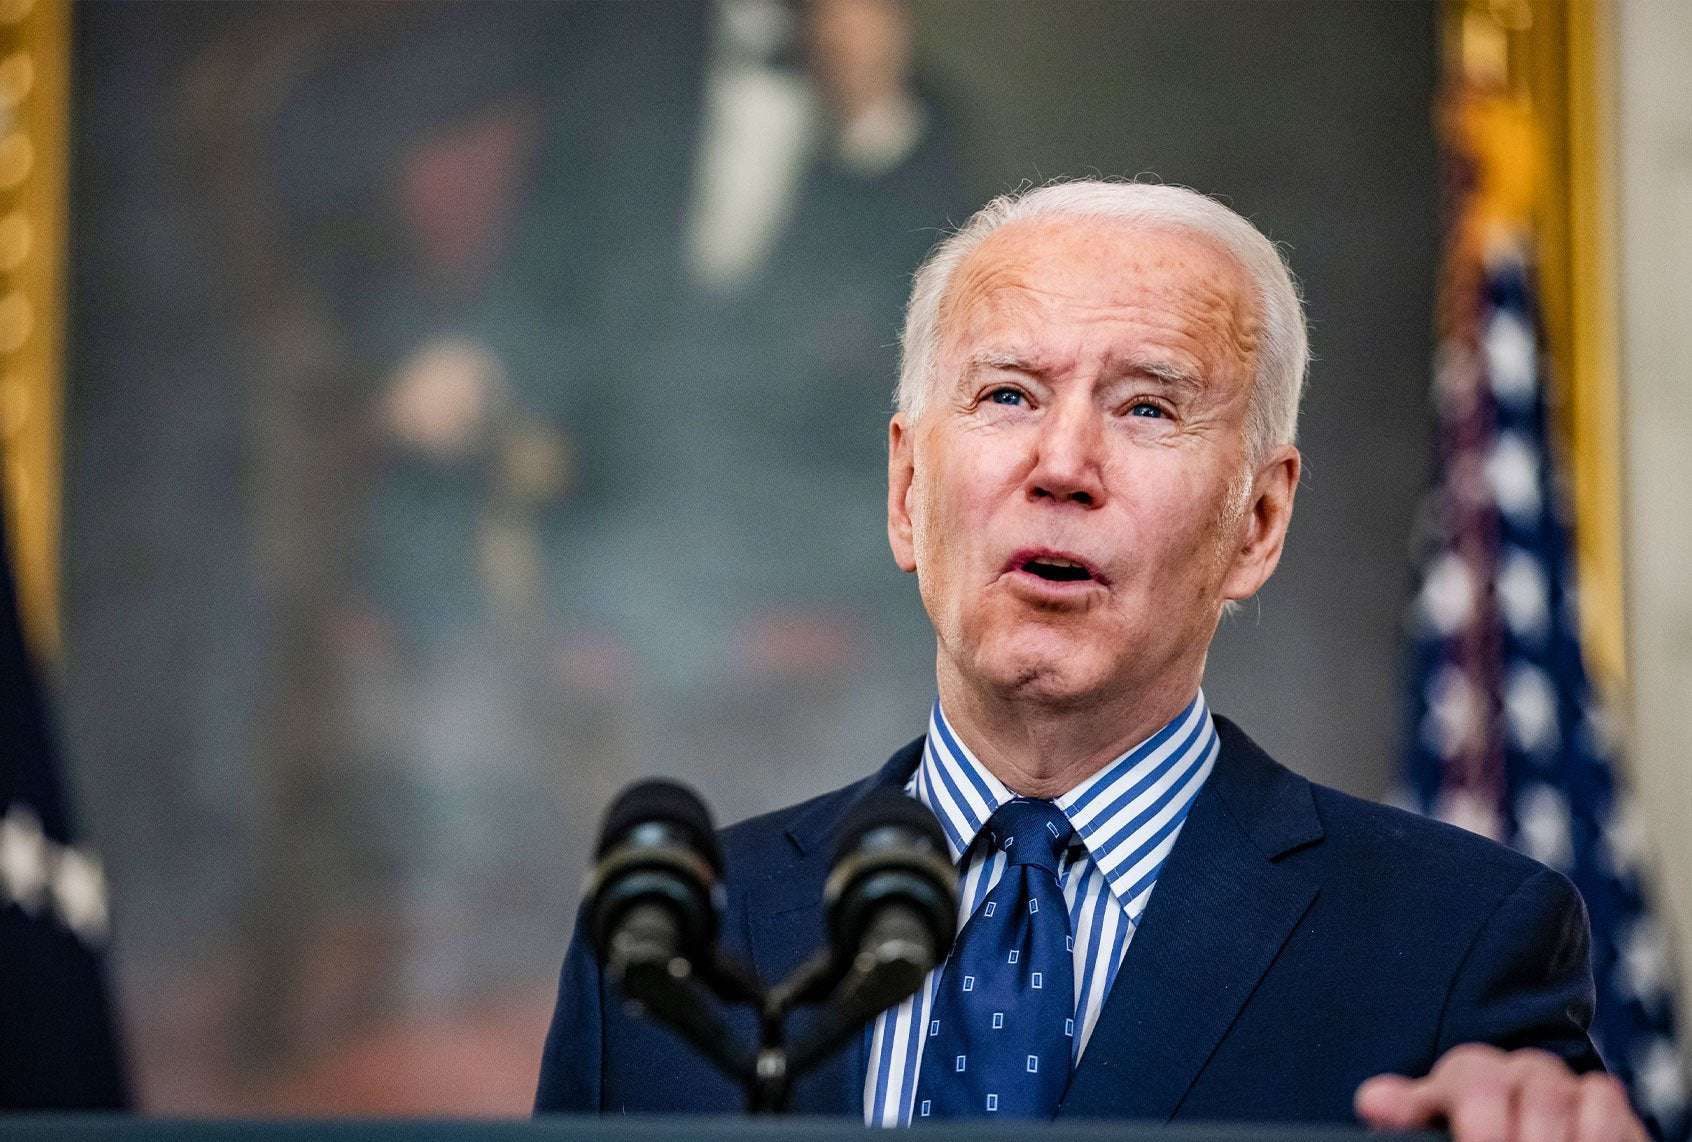 image for Joe Biden ignores Fox News at his first White House press conference, upsets right-wing media